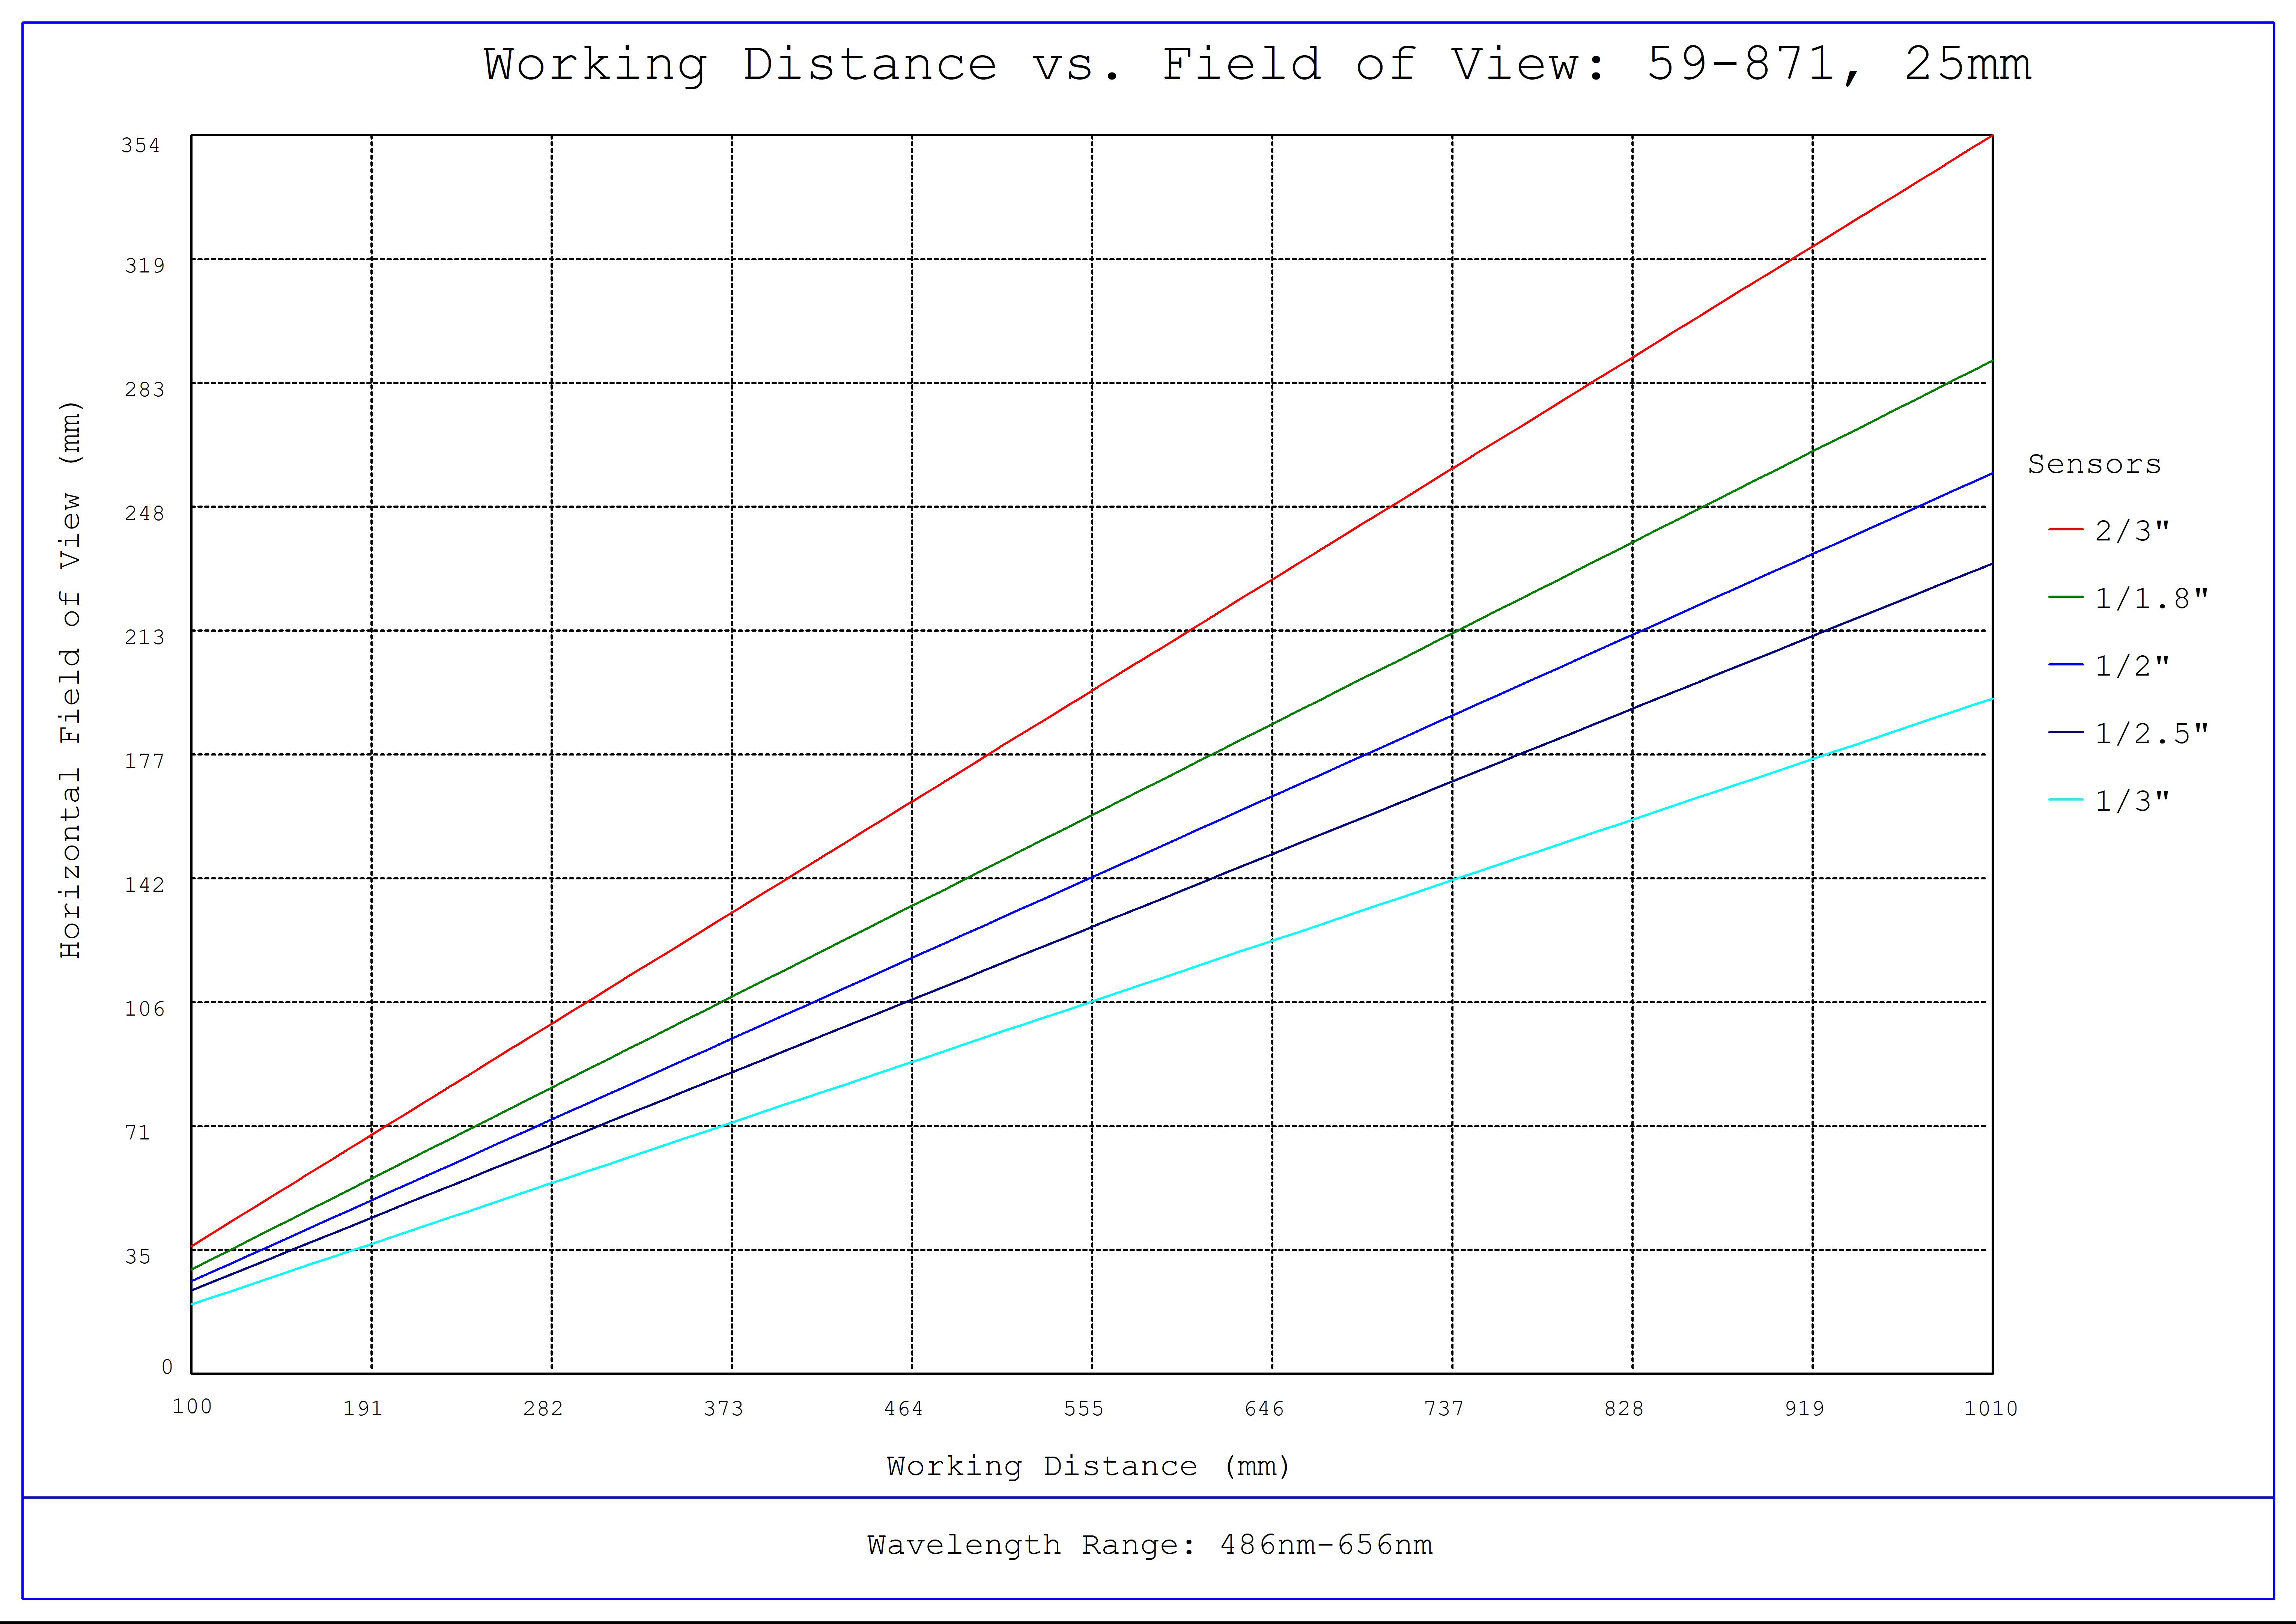 #59-871, 25mm C Series Fixed Focal Length Lens, Working Distance versus Field of View Plot